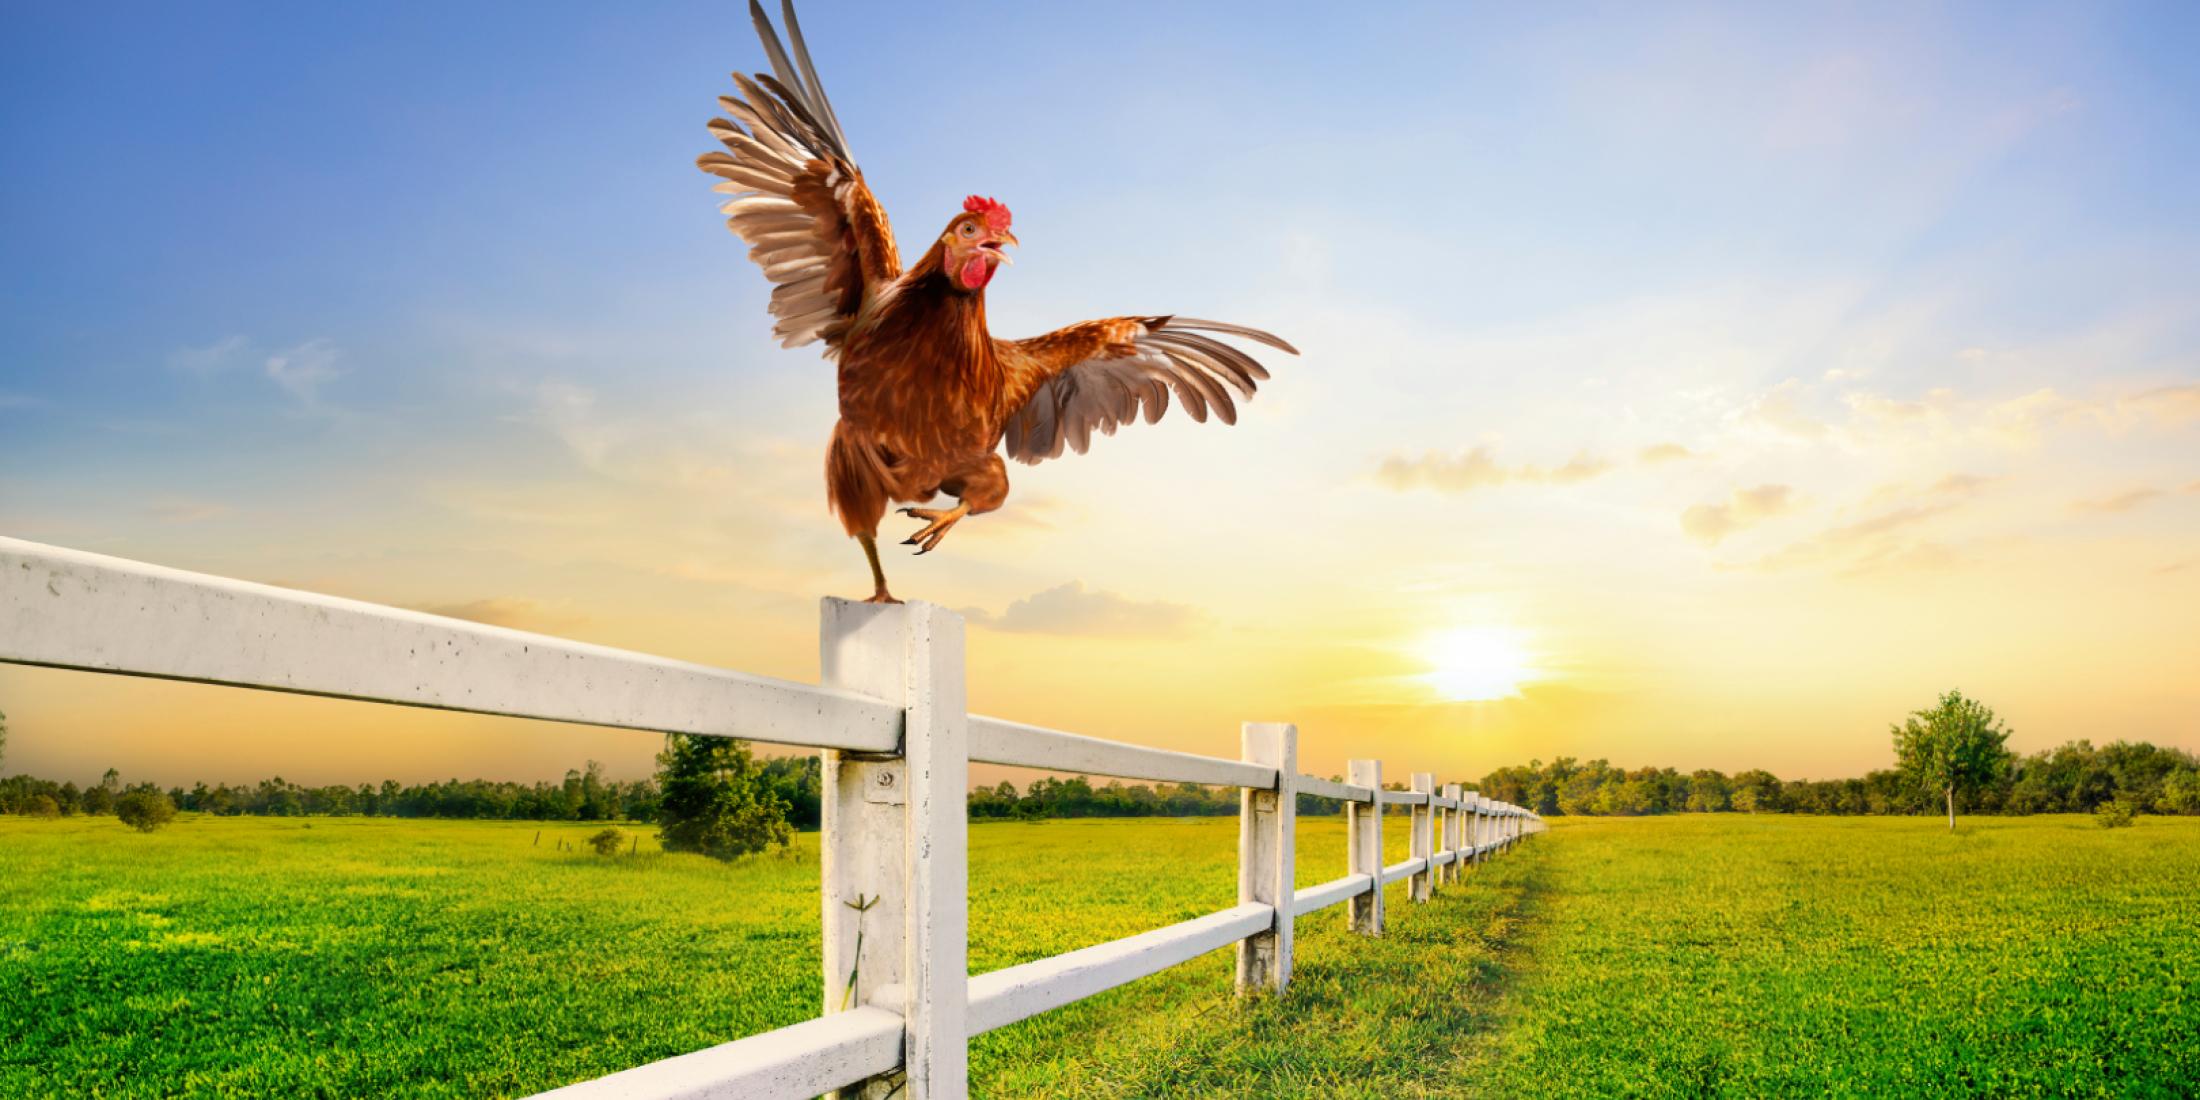 Chicken on a fence doing karate